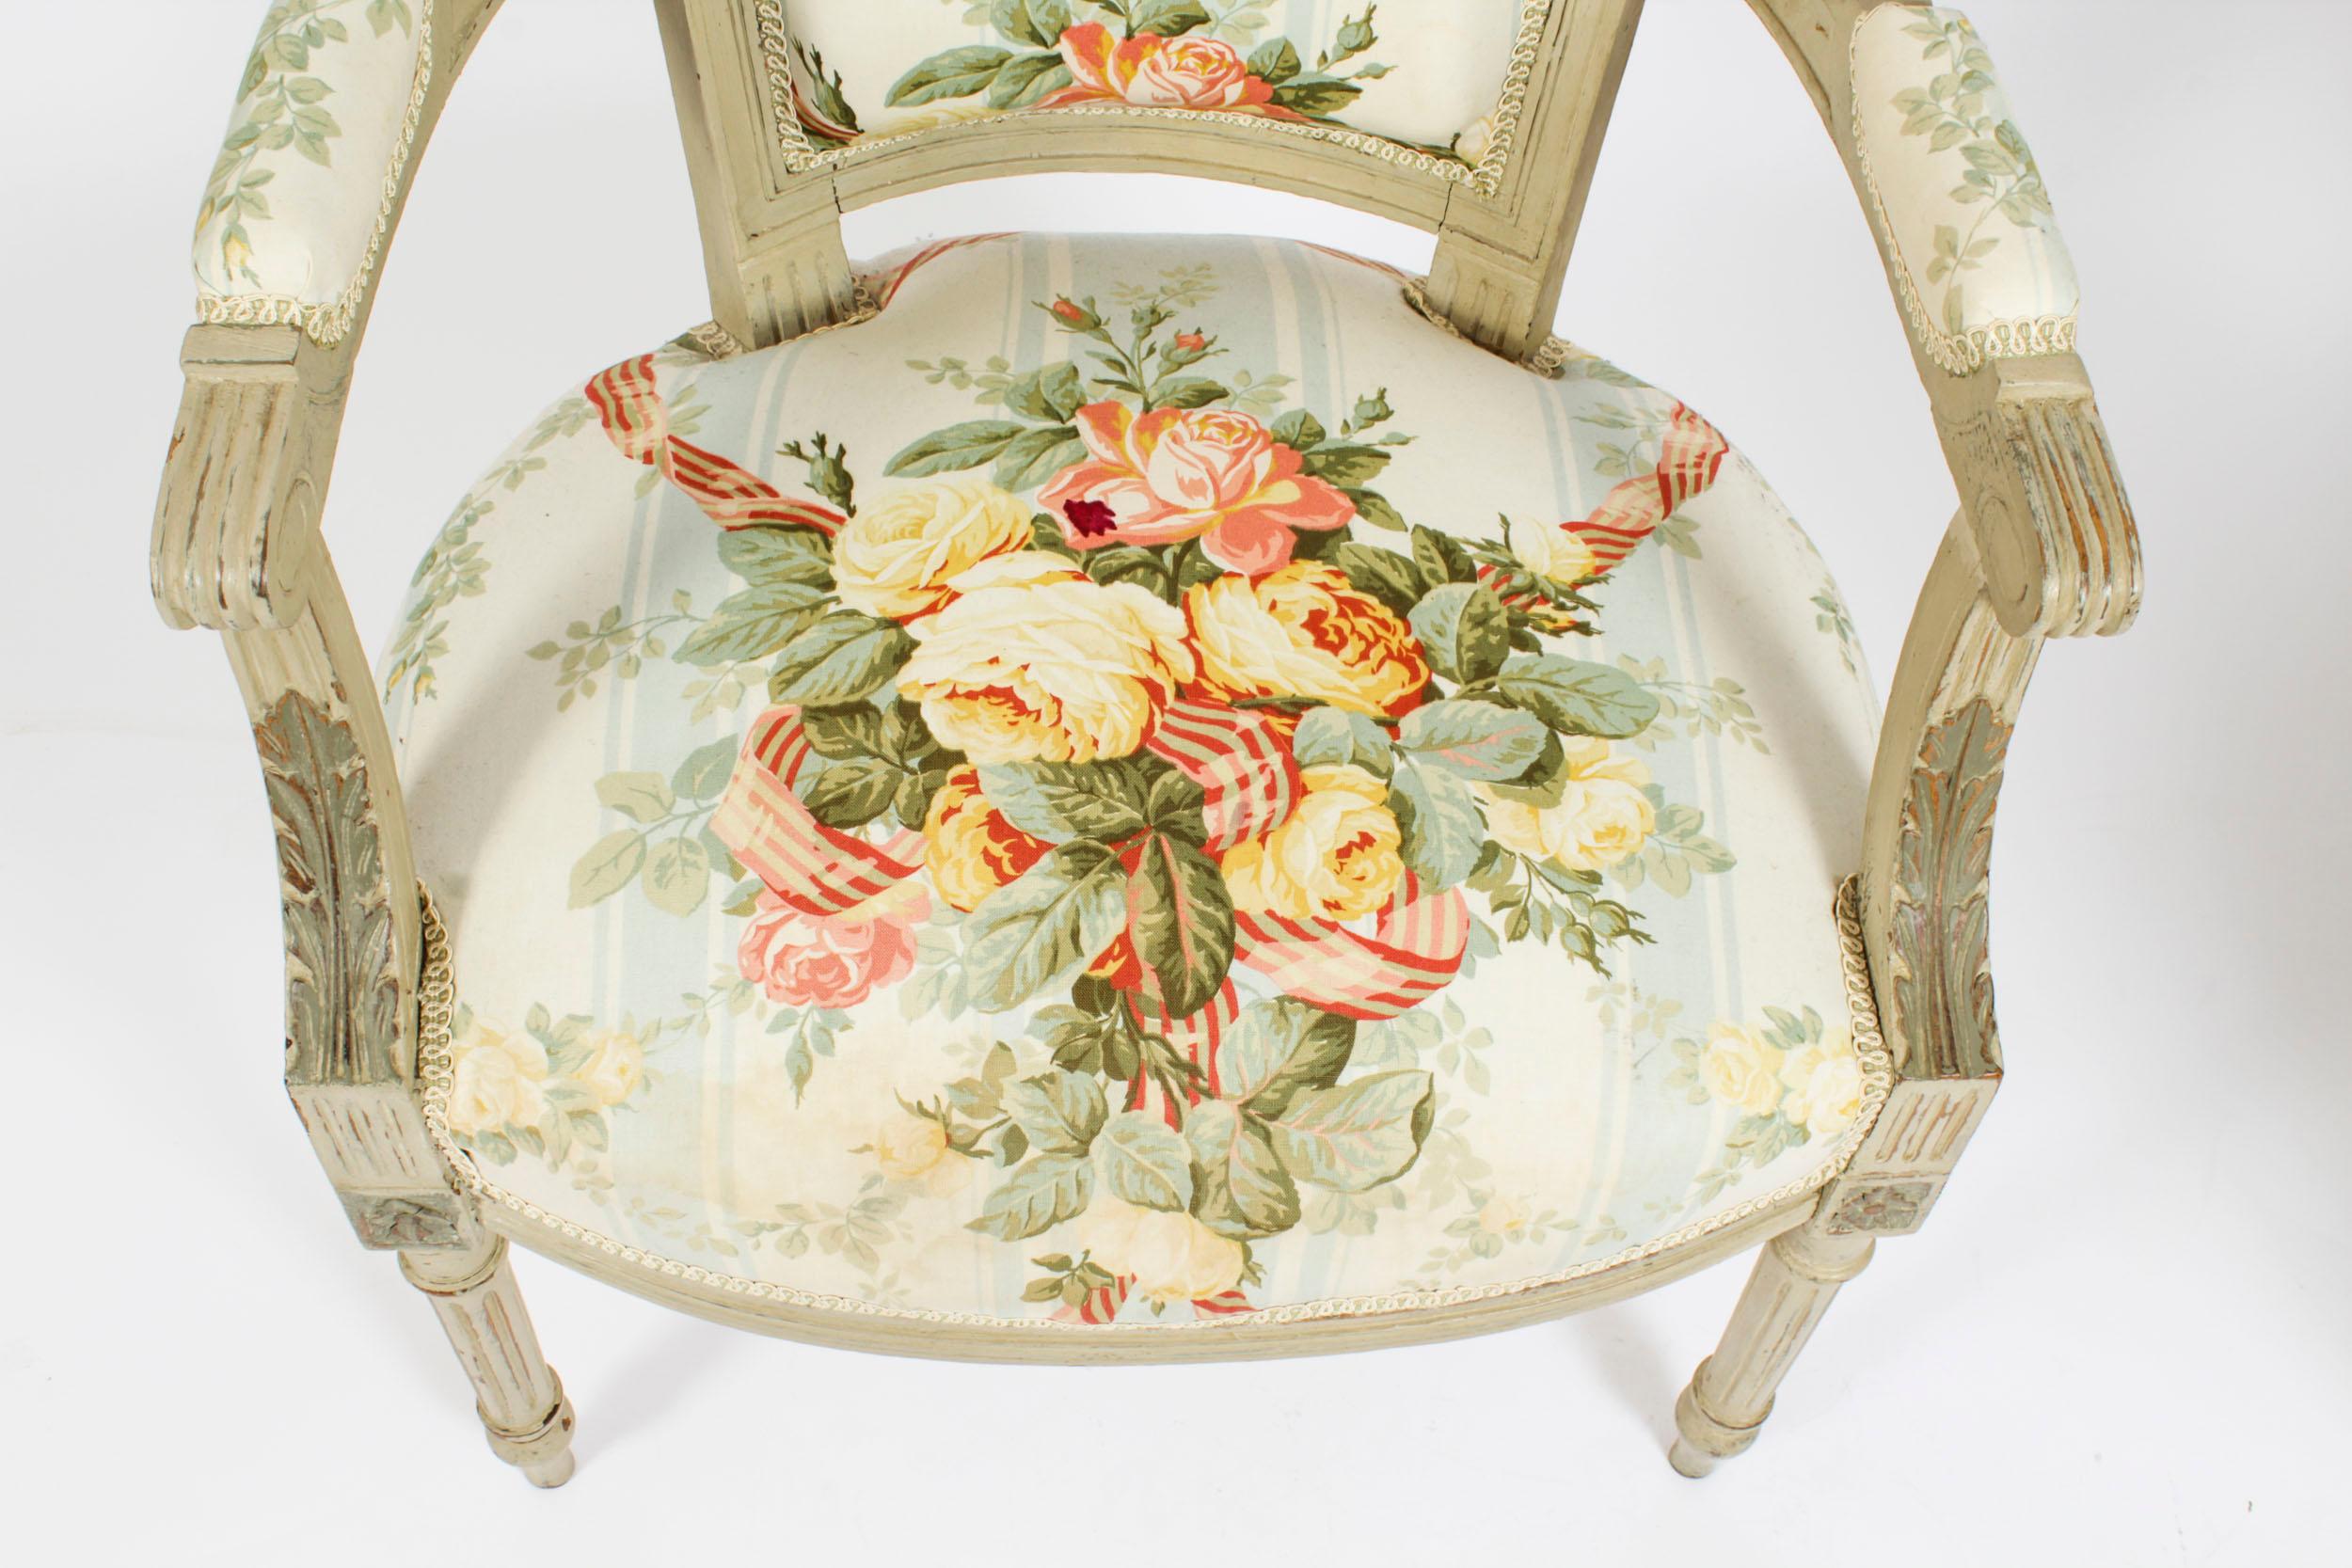 Upholstery Antique Pair French Louis XVI Revival Painted Fauteuil Armchairs, 19th Century For Sale